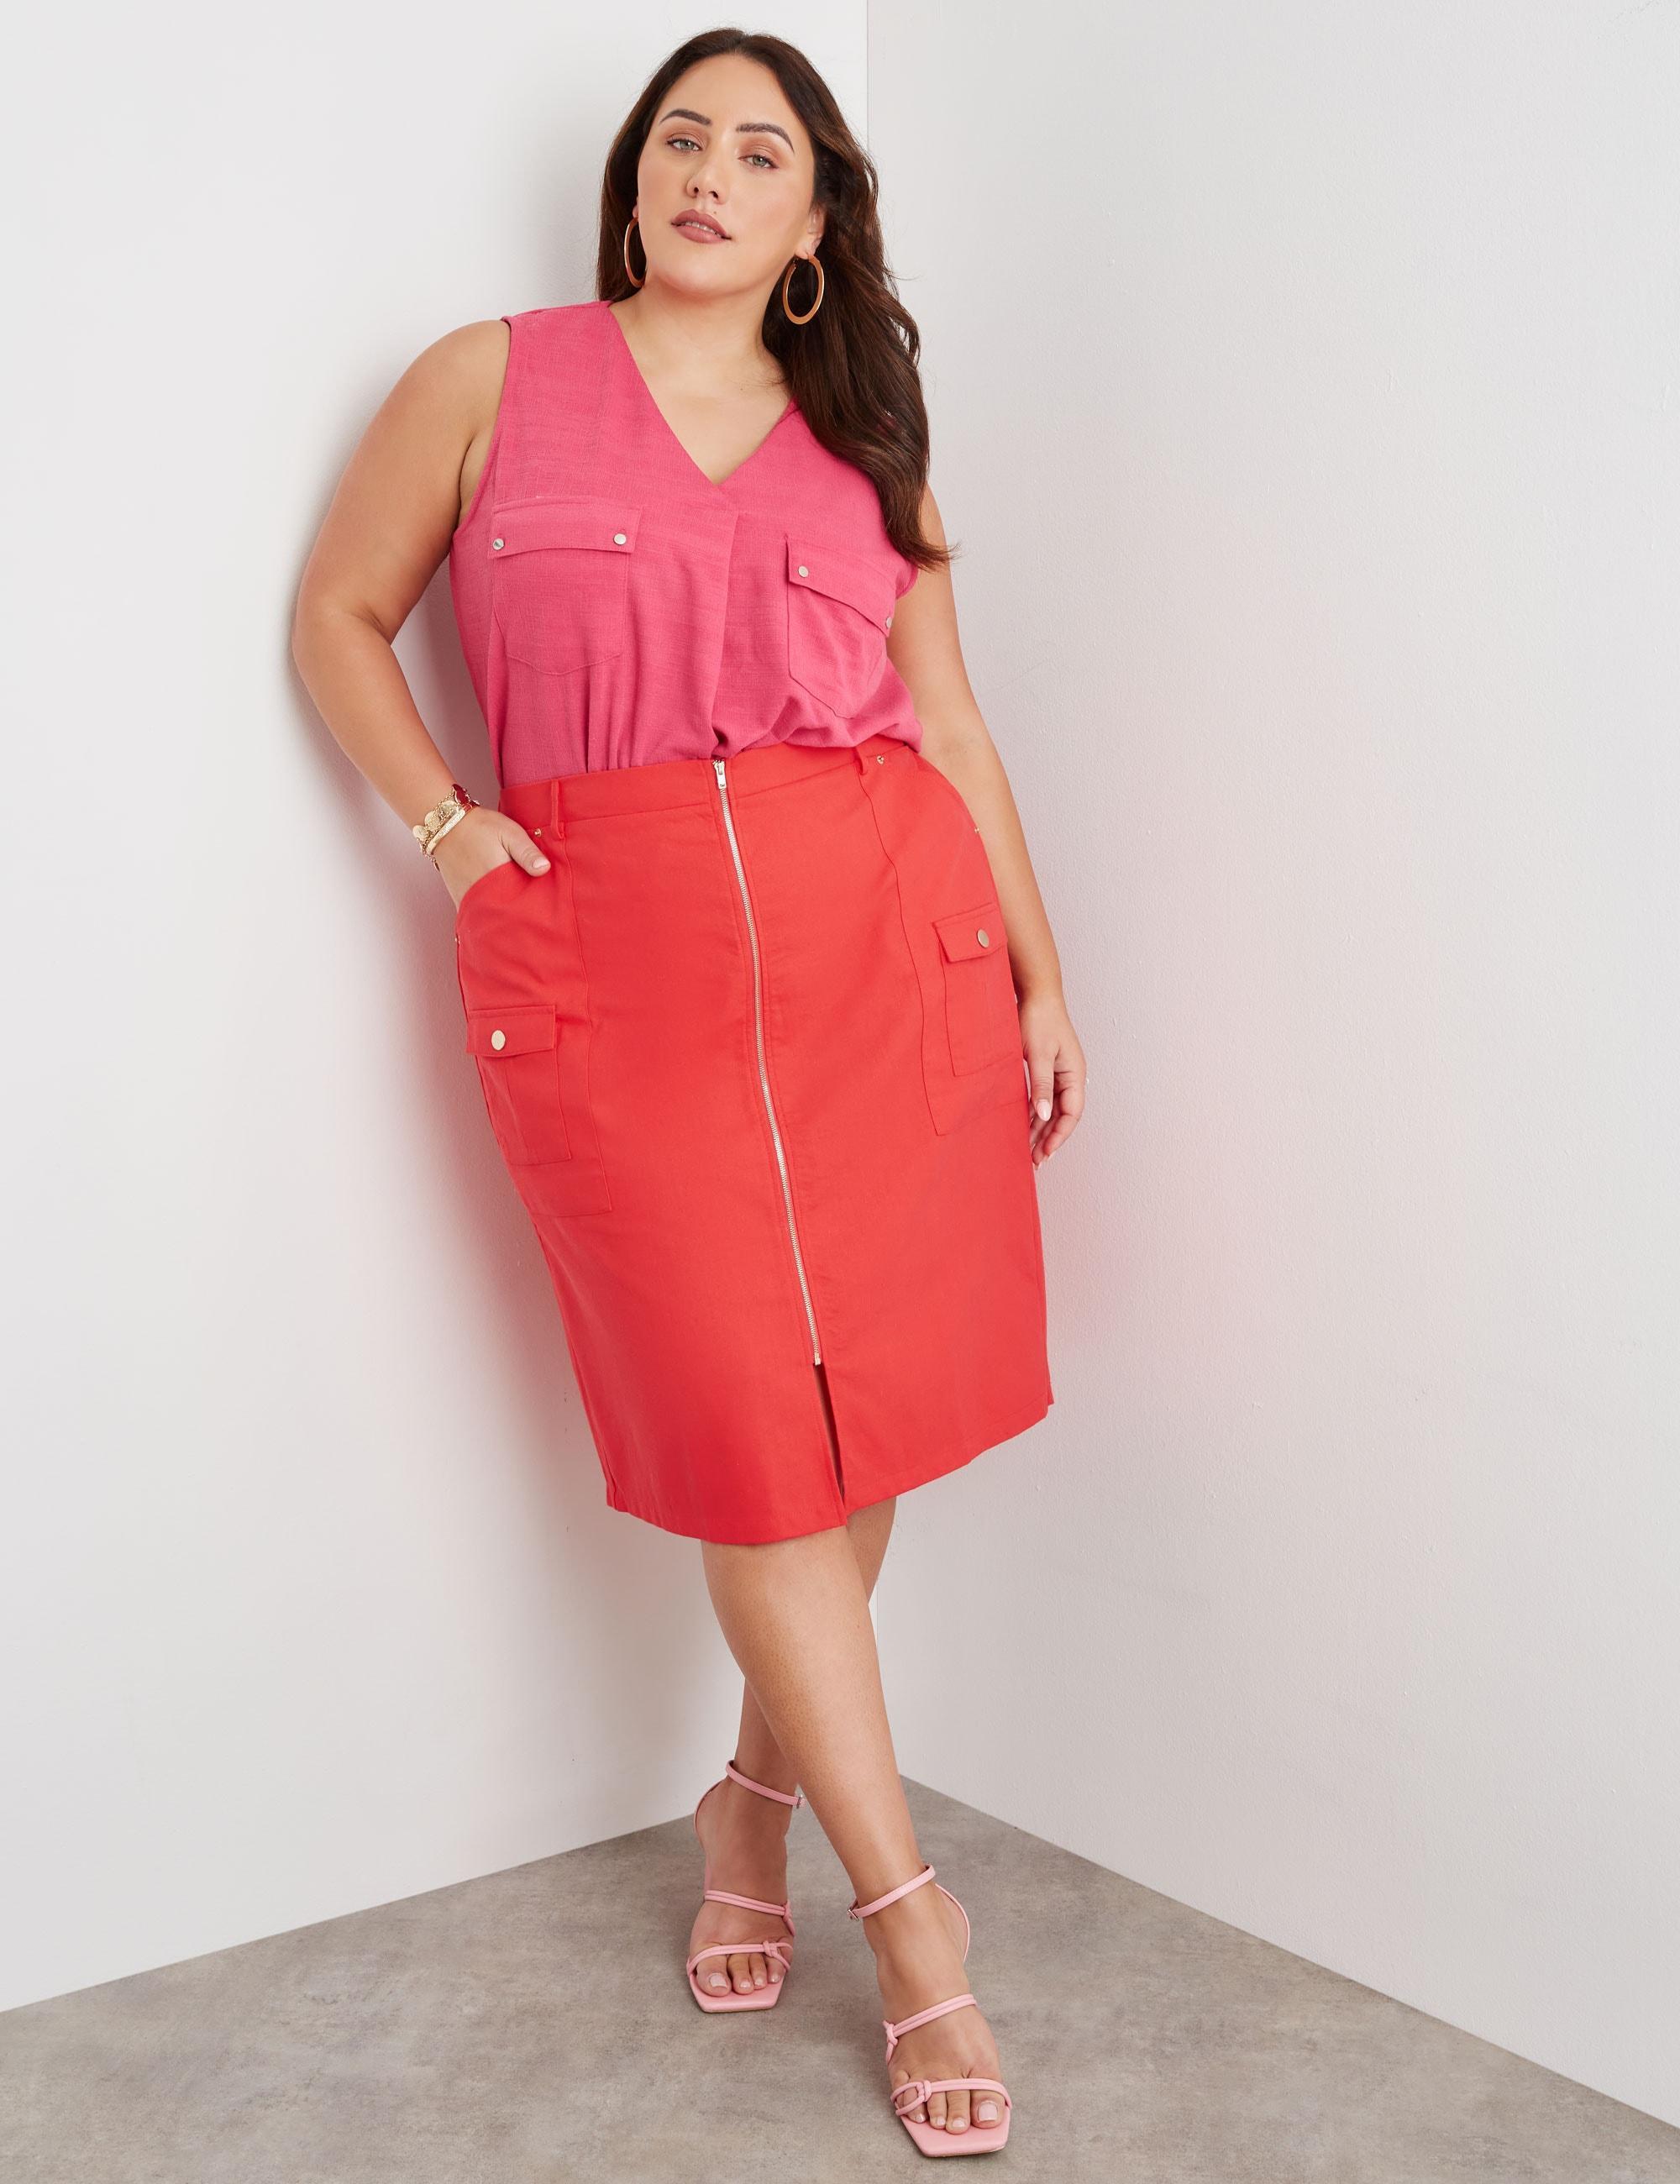 BeMe - Plus Size - Womens Skirts - Midi - Summer - Purple - Linen - Pencil - Berry - Fitted - Zipped Front - Knee Length - Casual Fashion Clothes